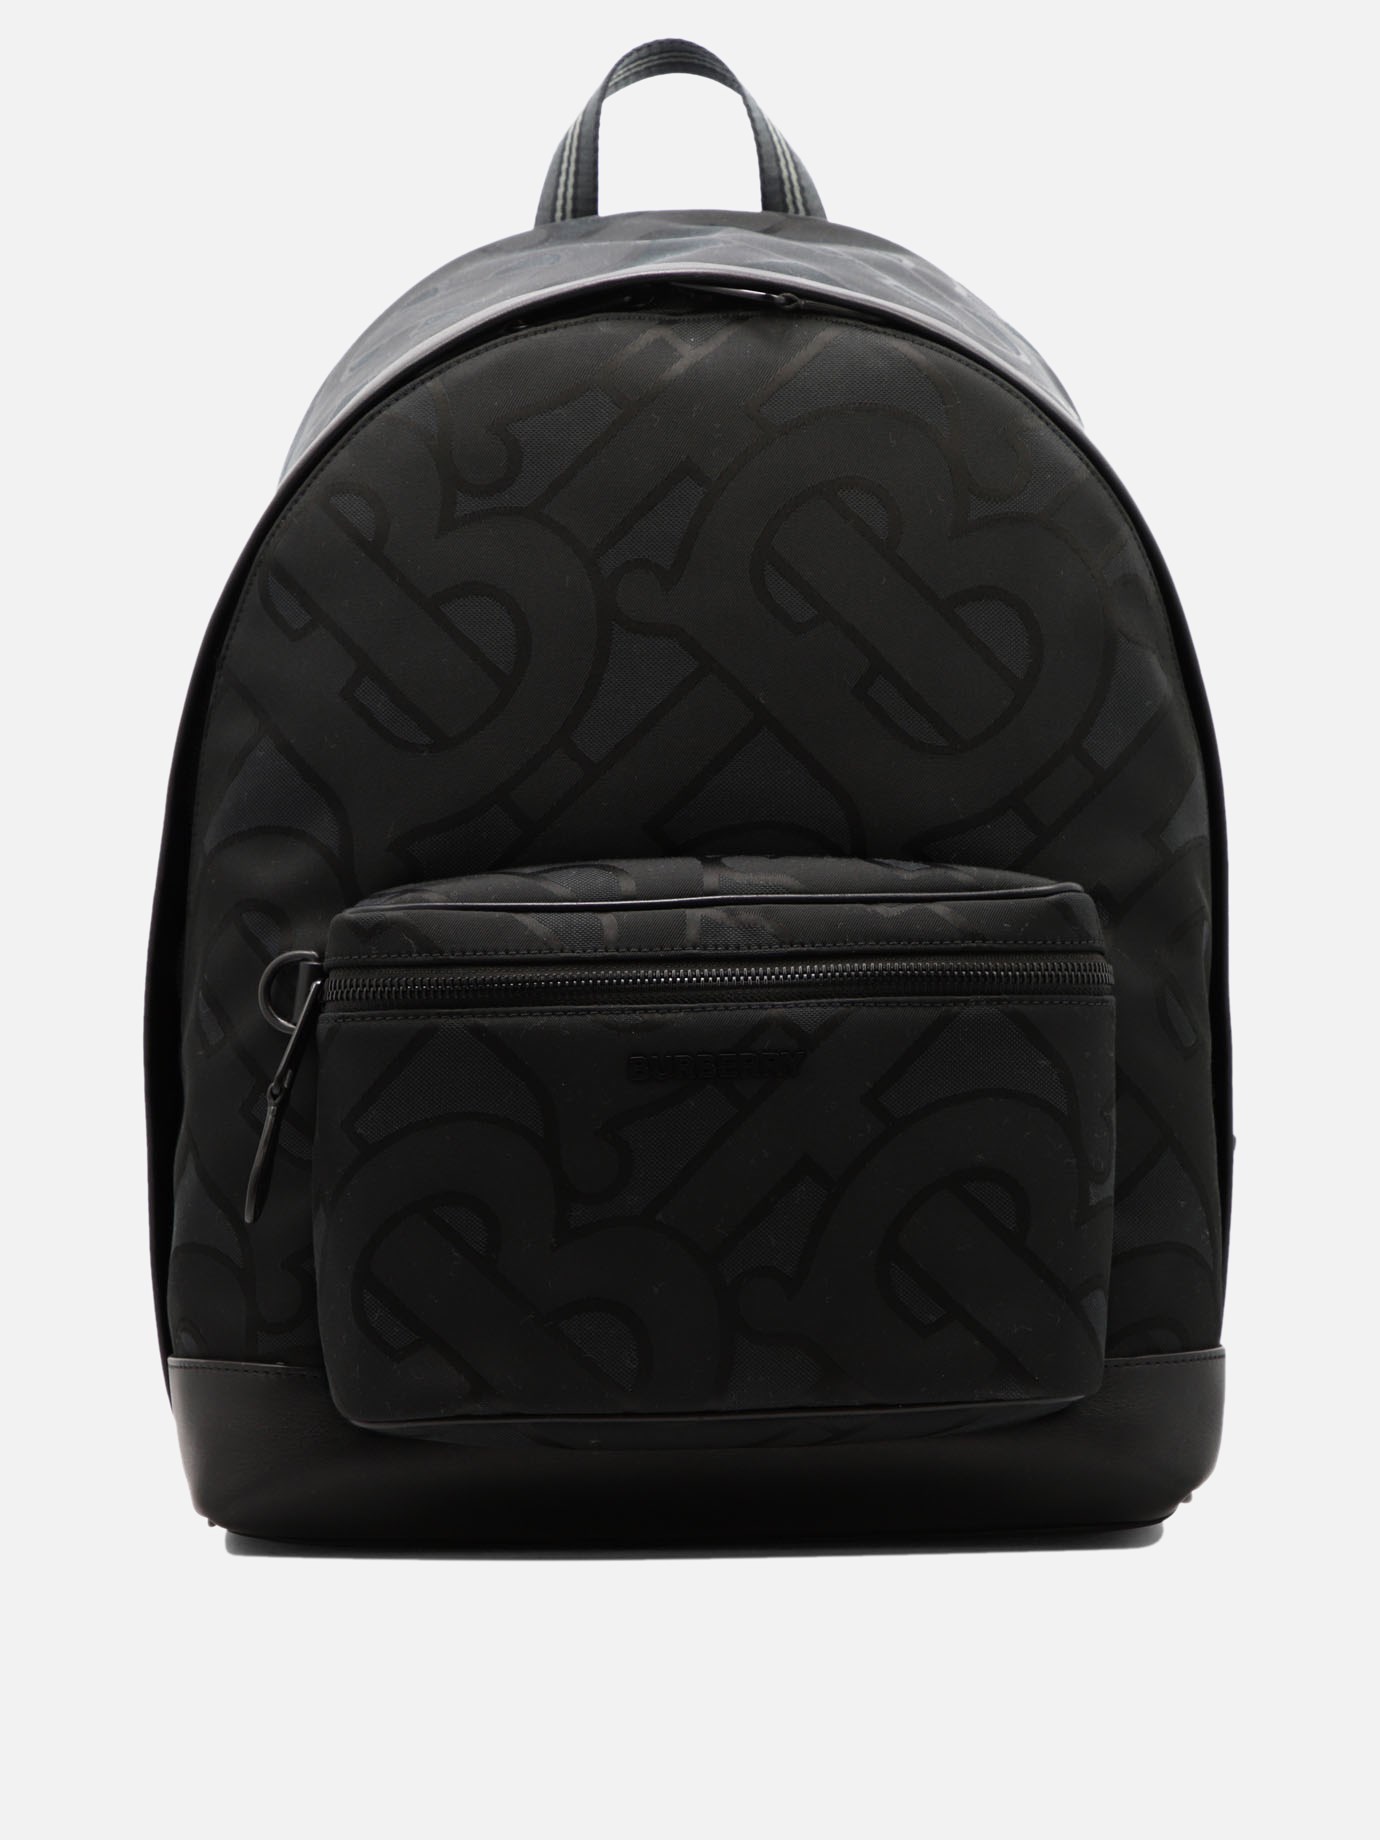 Backpack with monogram by Burberry